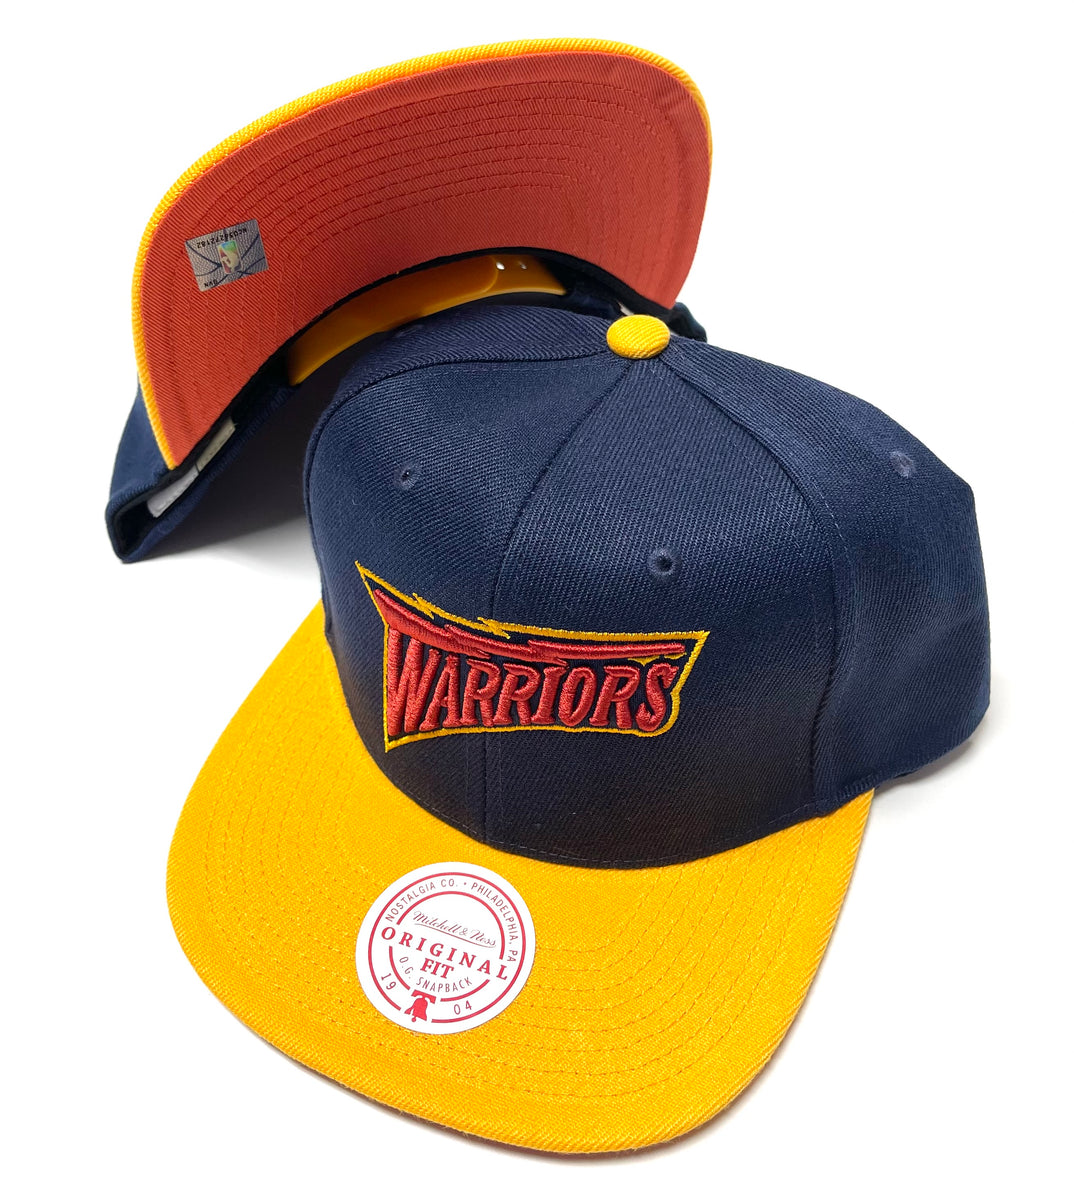 MITCHELL & NESS RELOAD GS WARRIORS POM BEANIE (GOLD) – So Fresh Clothing